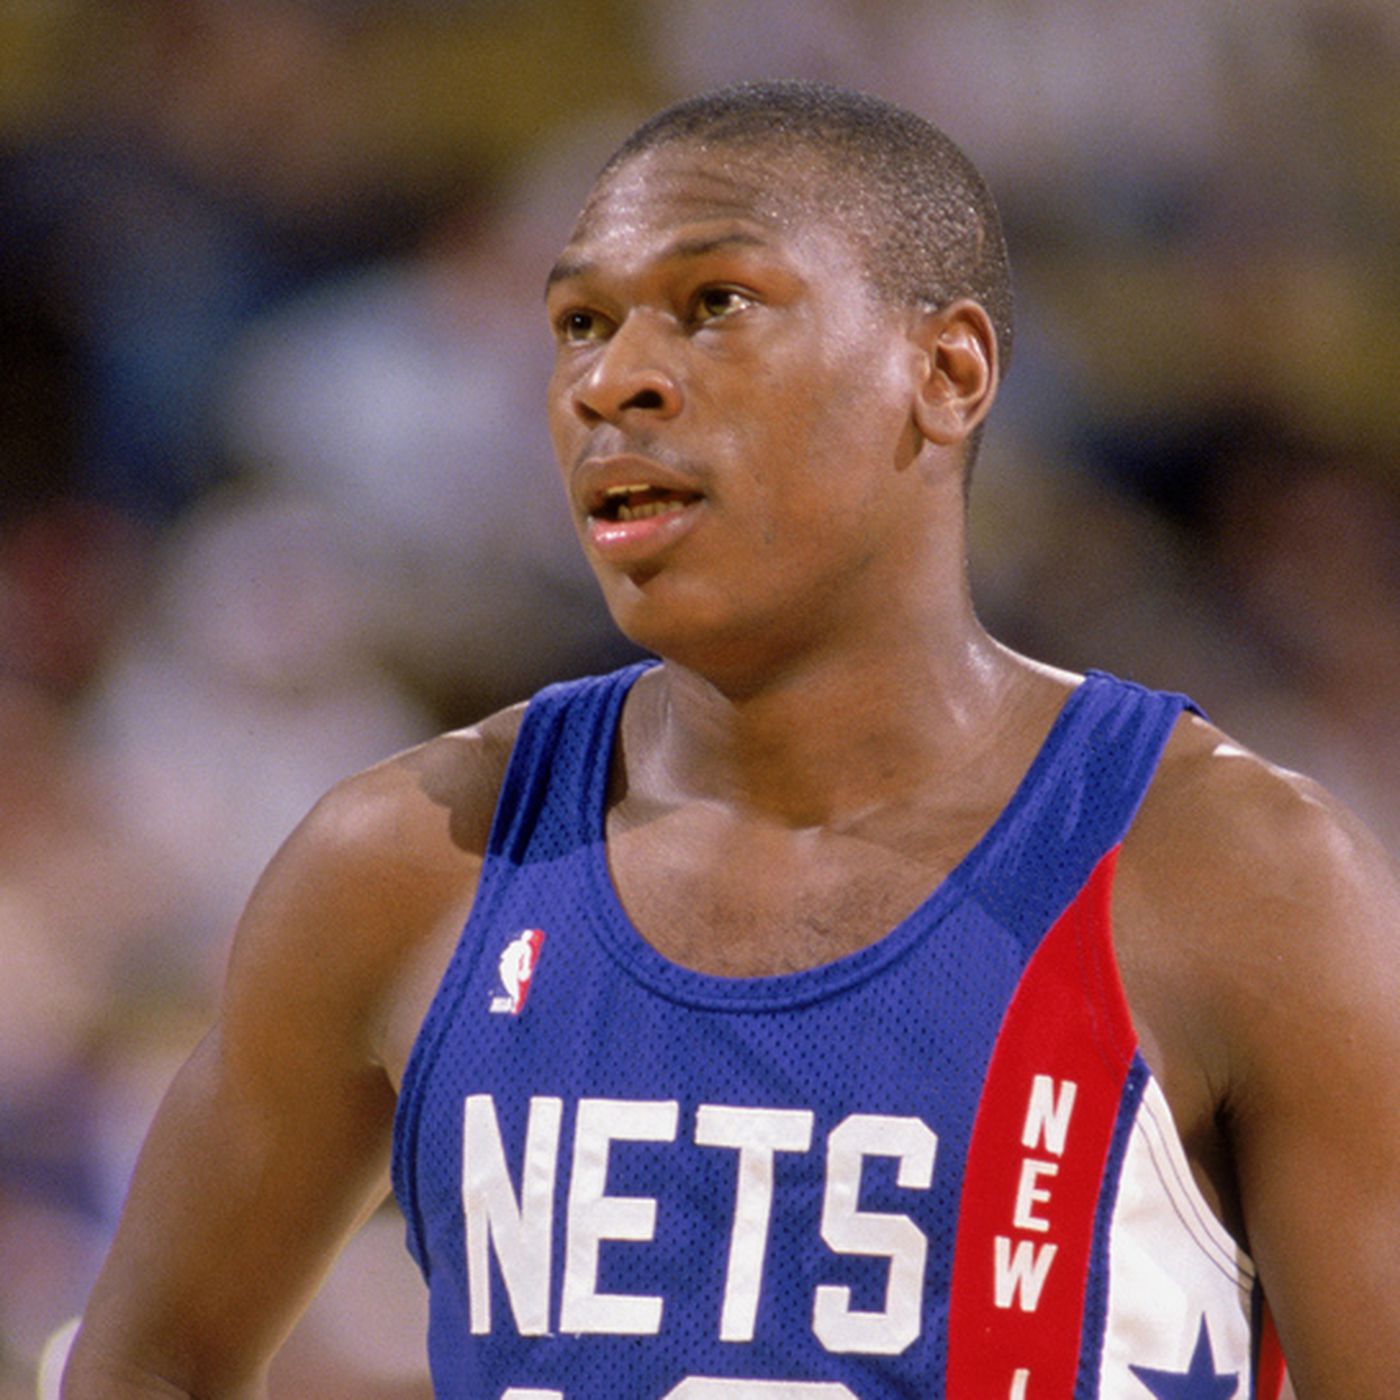 Former NBA All-Star Mookie Blaylock is in critical condition following a  car accident